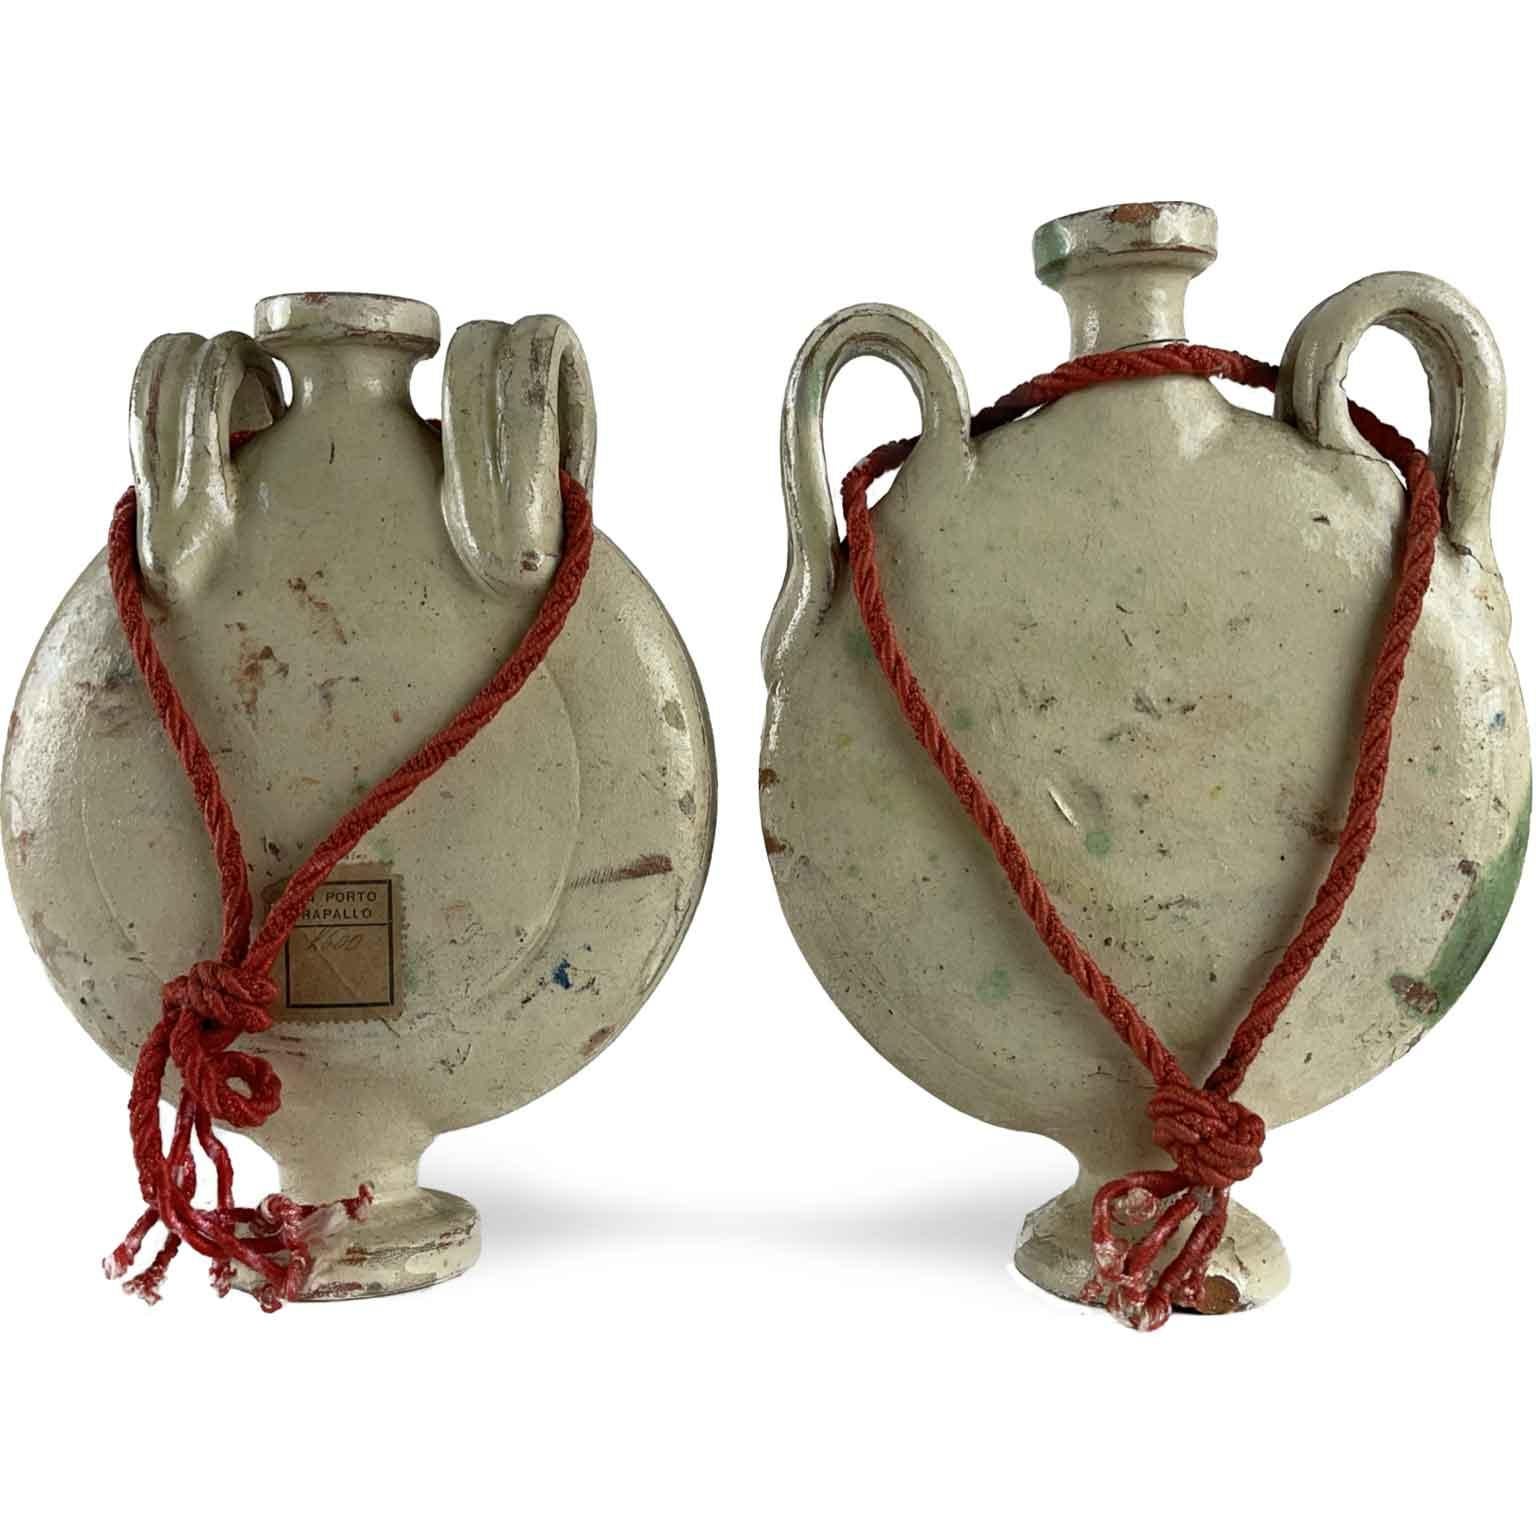 Hand-Crafted Italian Faience Bottles Two 19th Century Pilgrim Flasks Blue Decor Almost a Pair For Sale